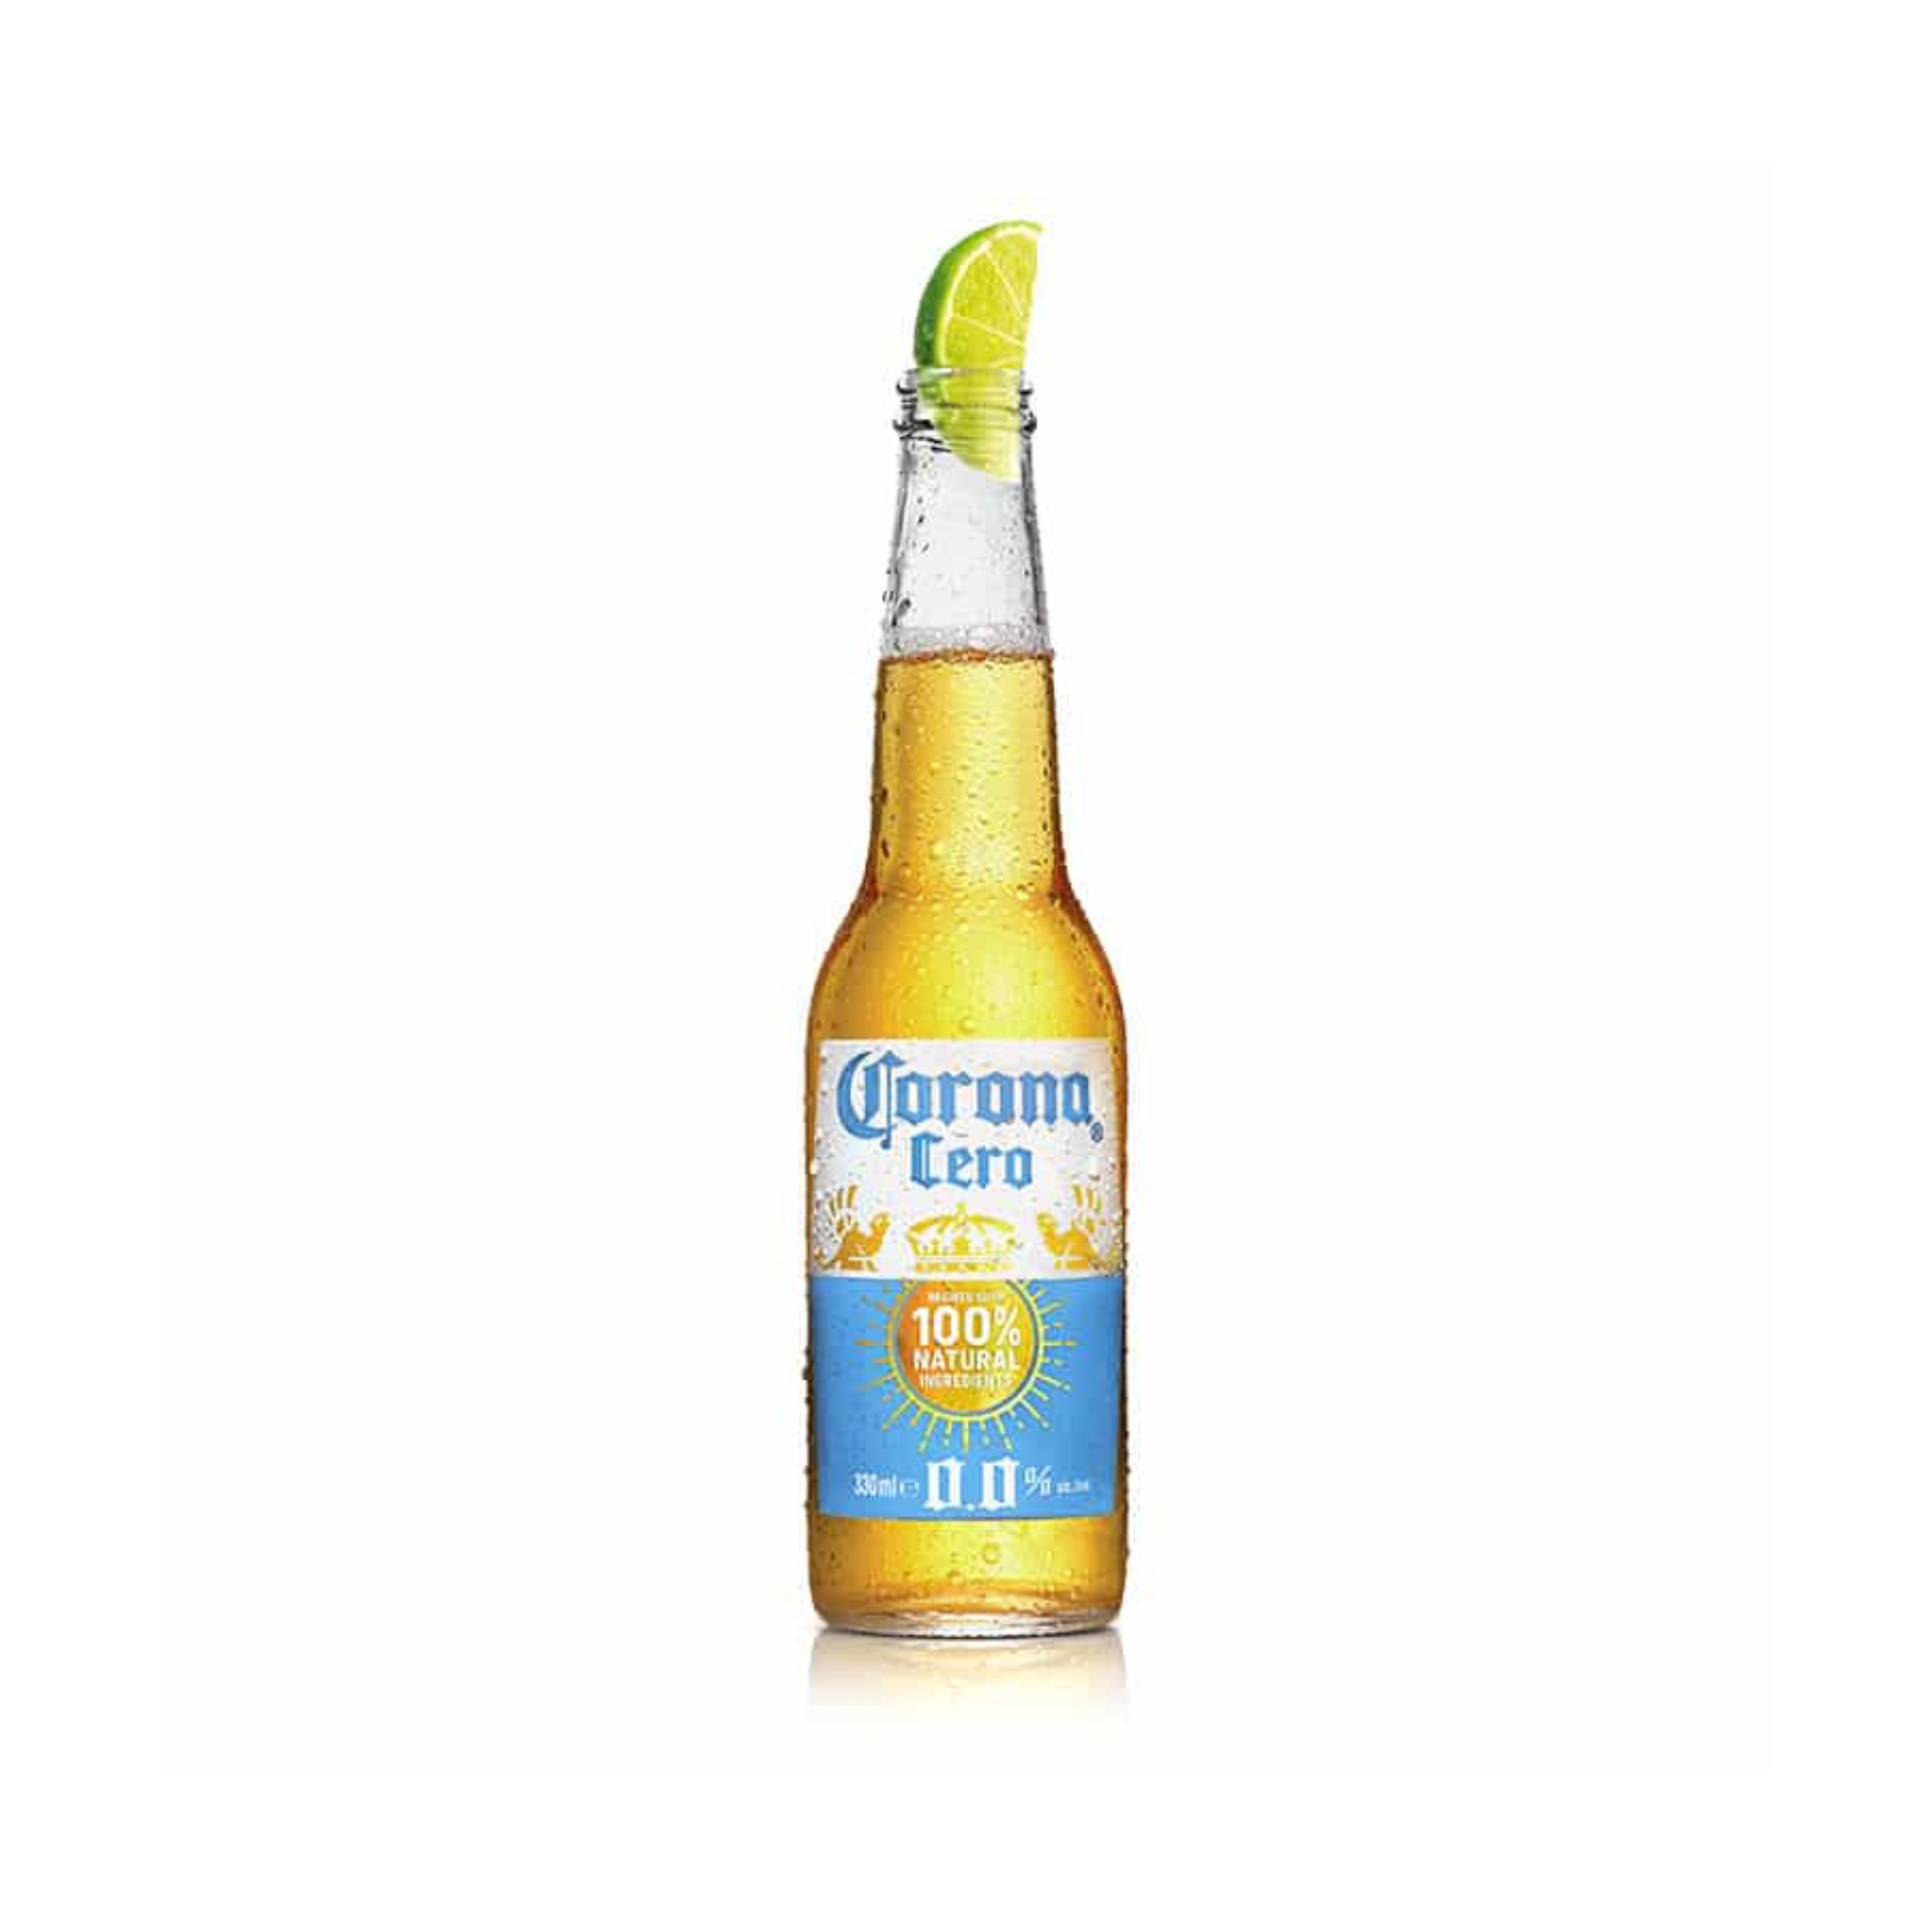 Corona Cero 0.0% Lager Beer with Lime